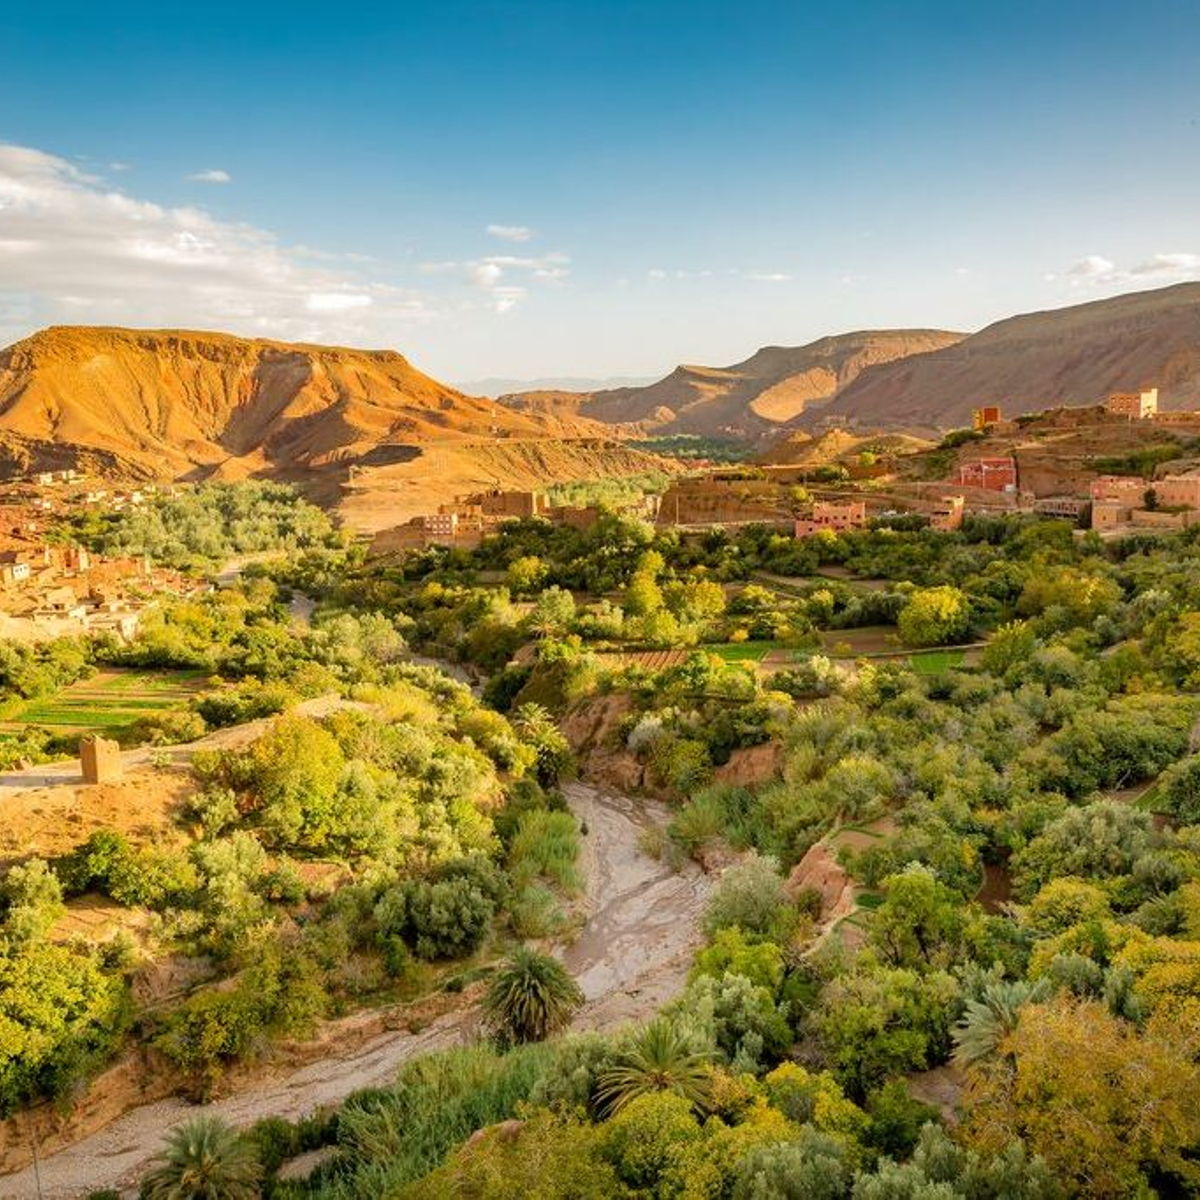 Day trip to the Atlas Mountains with a Berber lunch